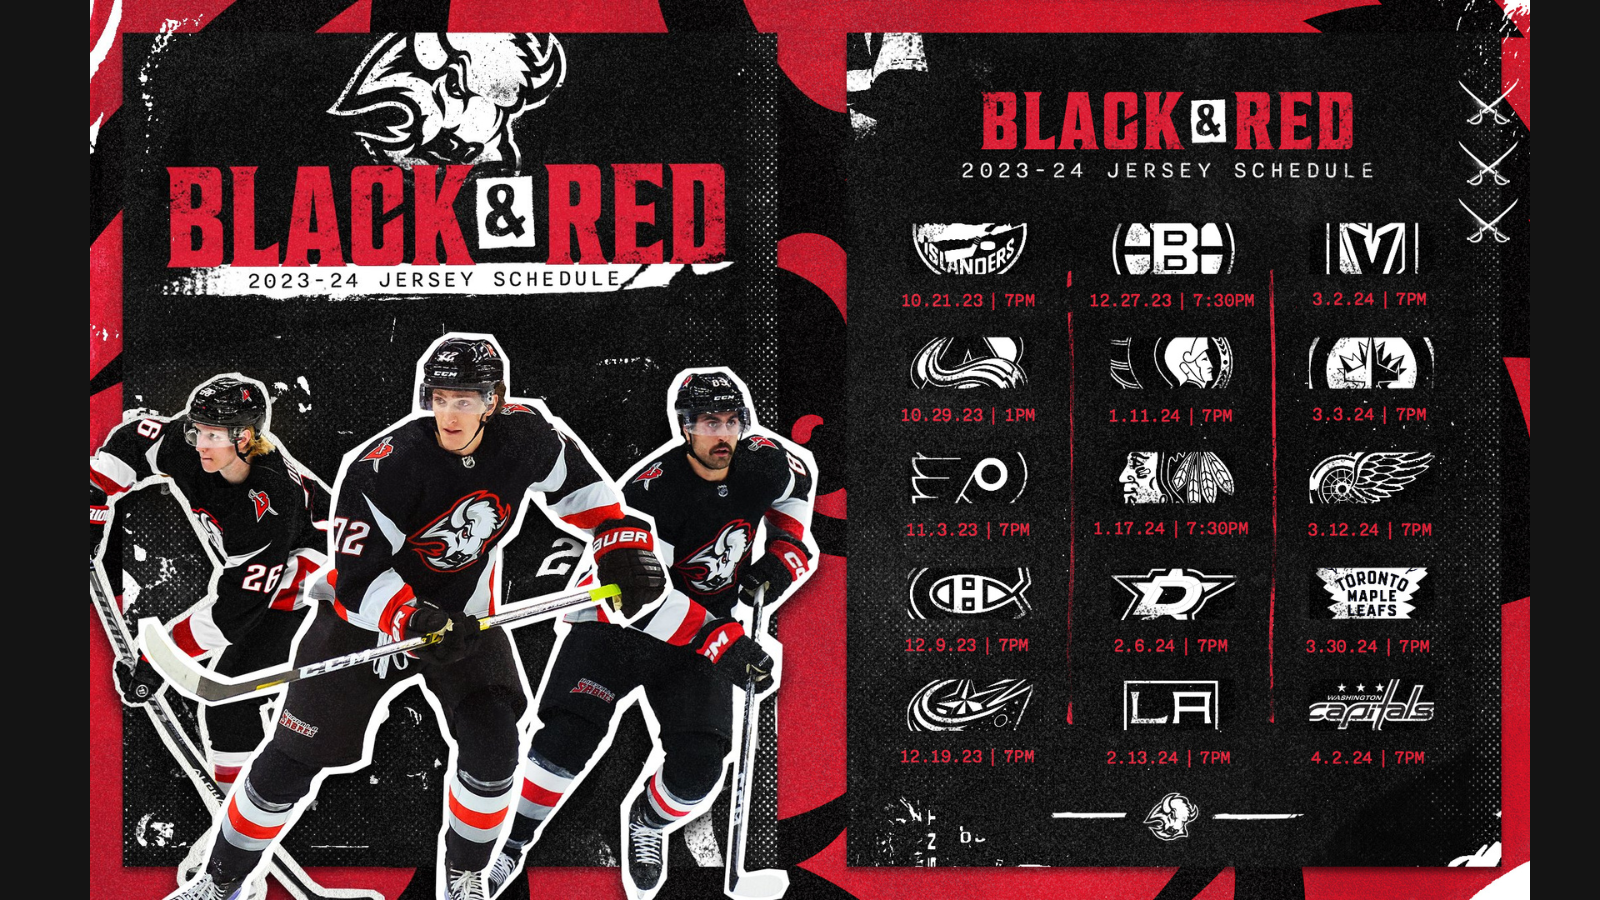 Sabres announce dates for Red and Black jerseys in 2022-23